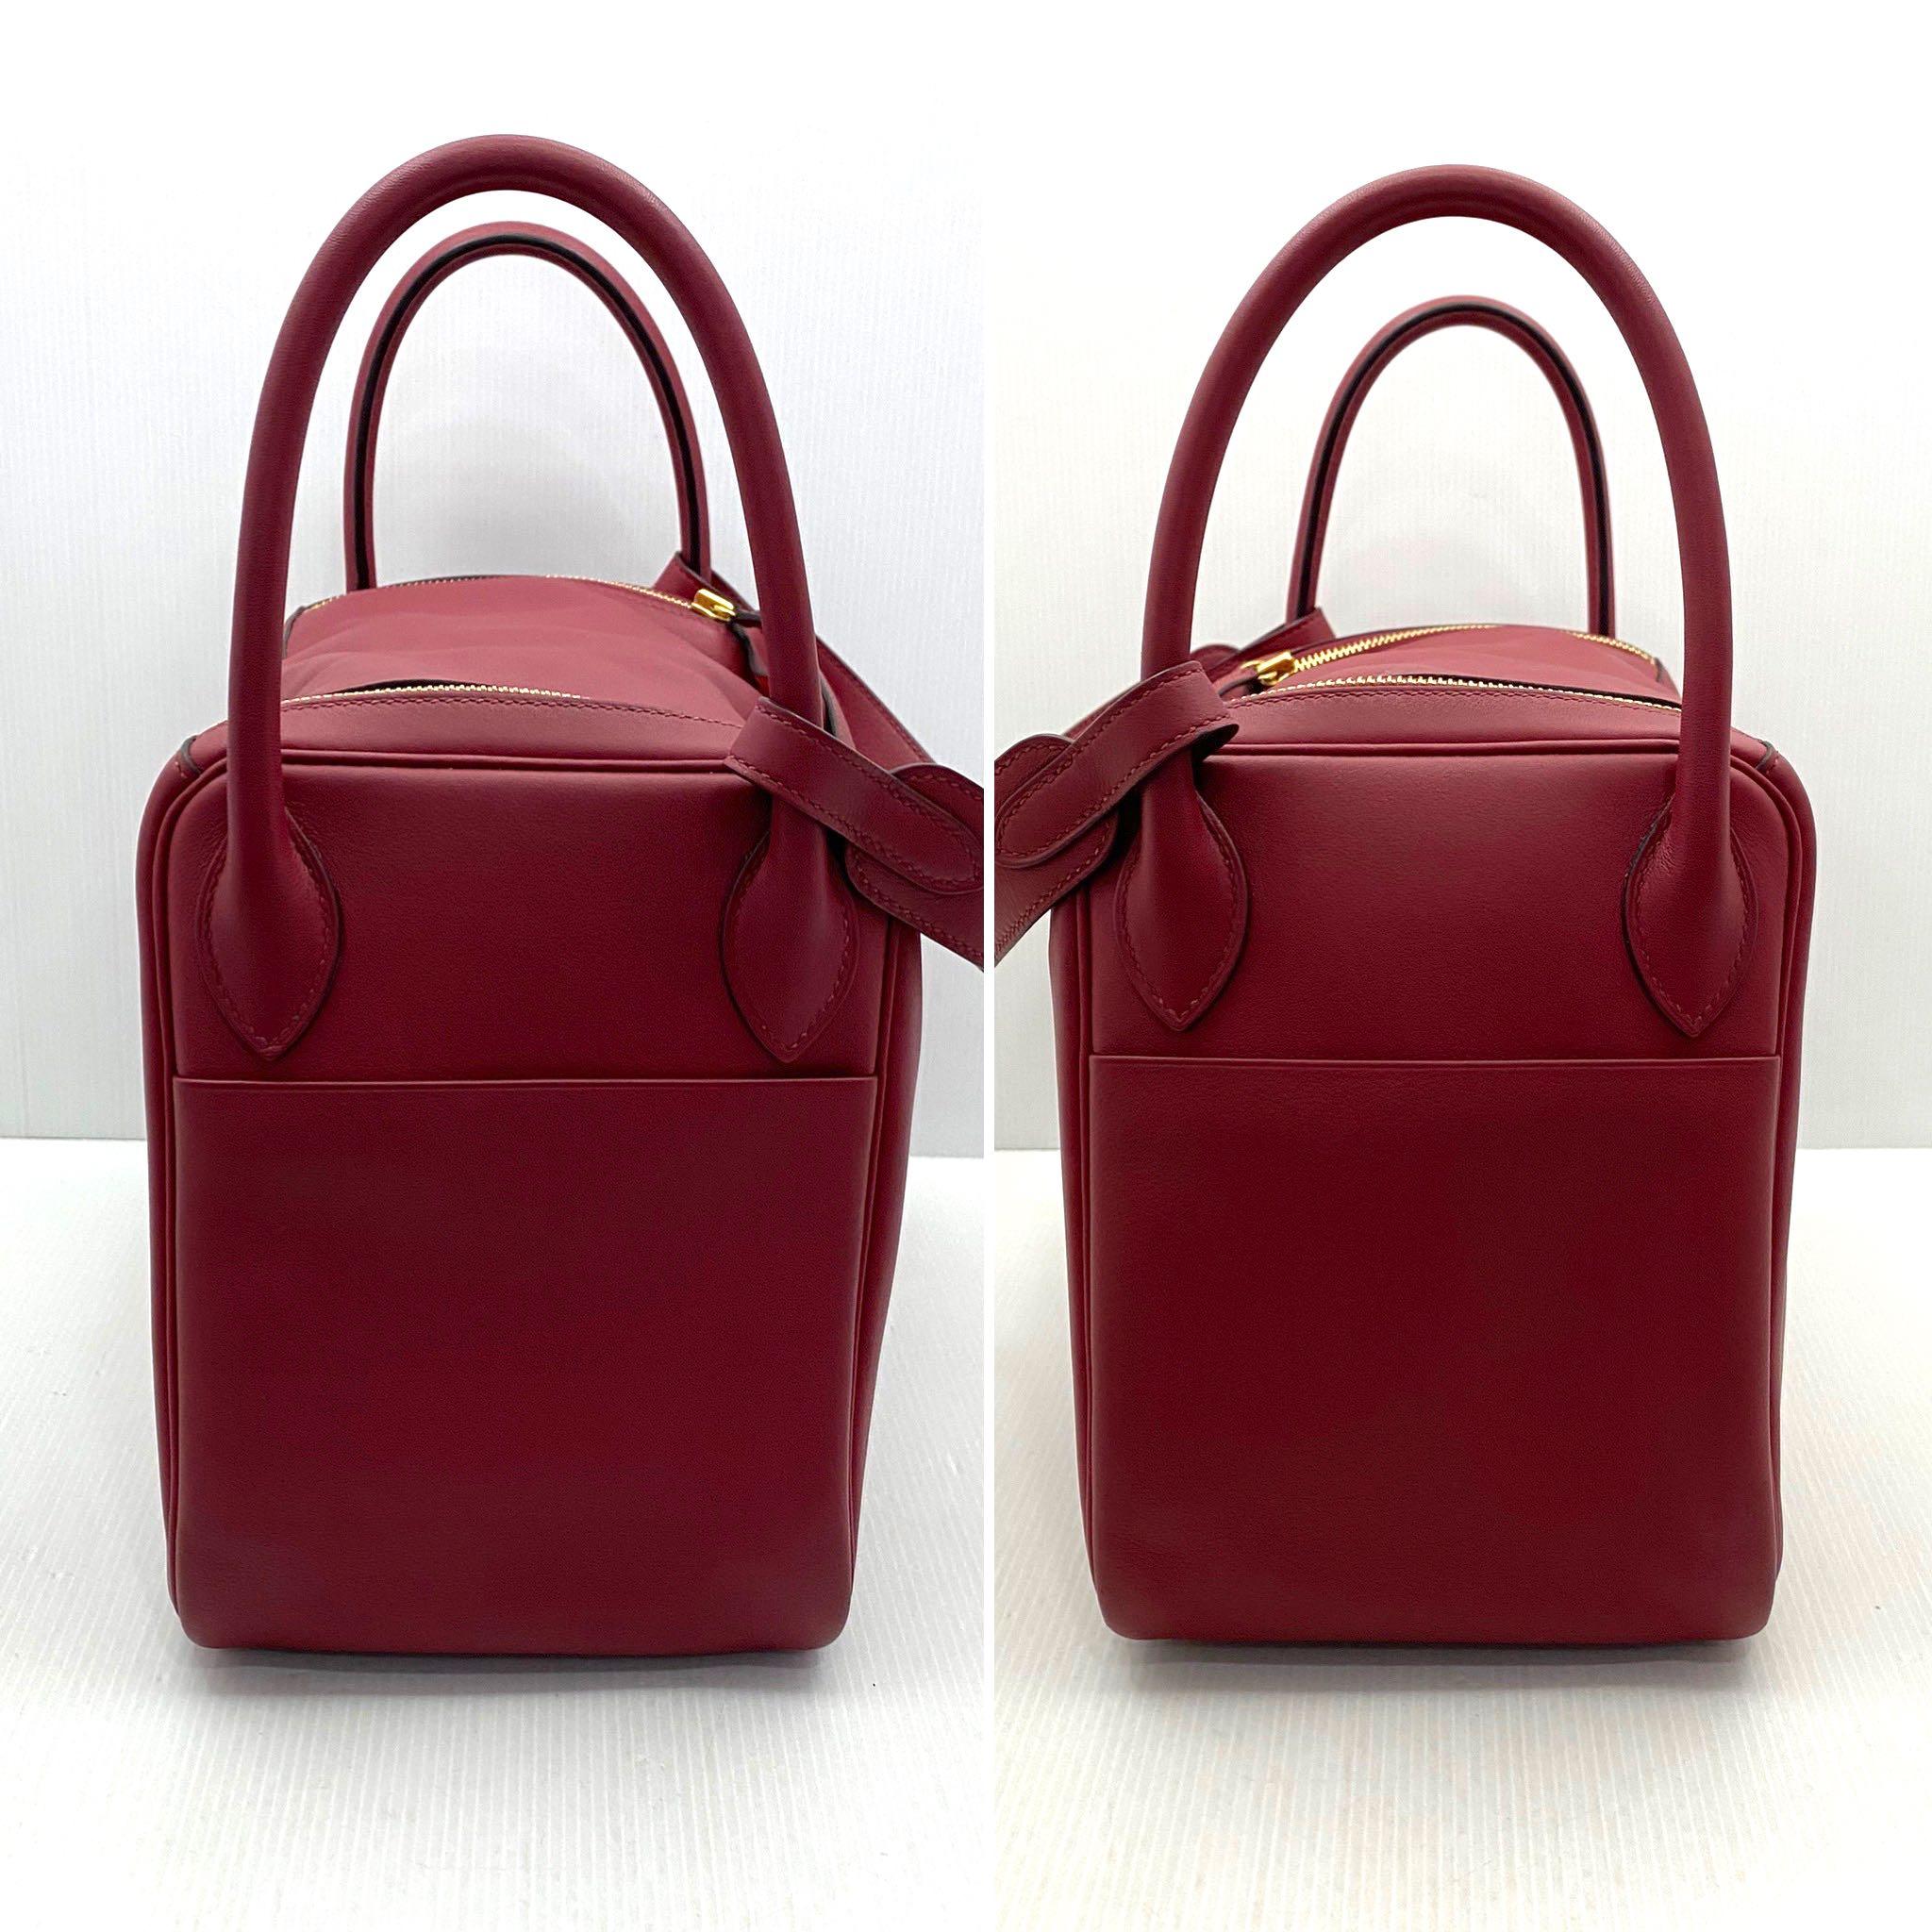 Hermes Lindy 30 rouge grenat and orange with permabrass hardware.